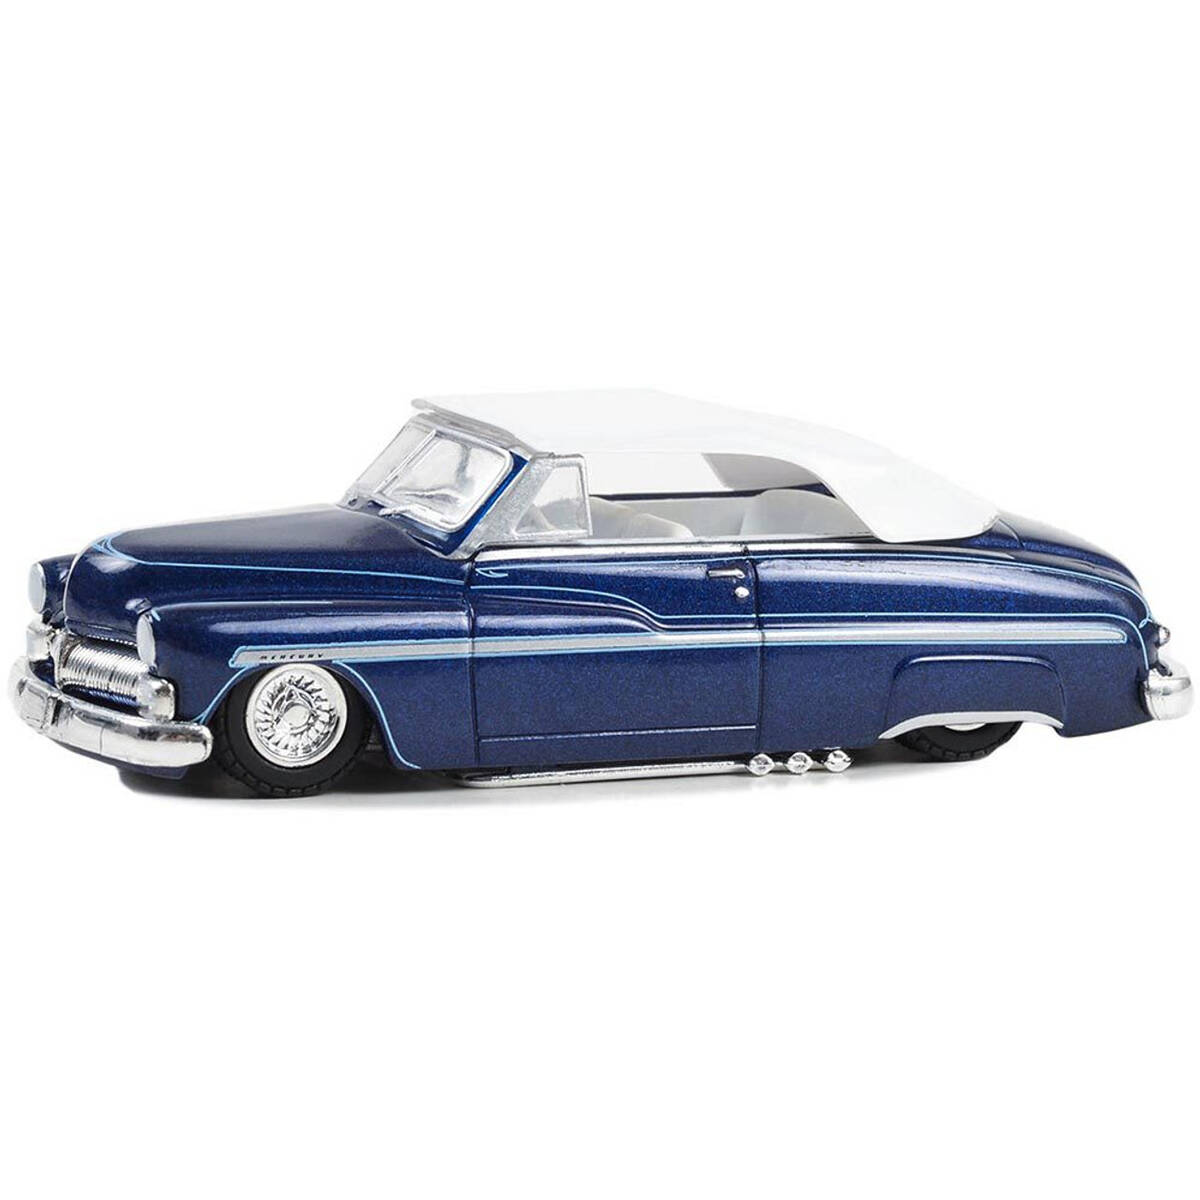 Greenlight 1/64 California Lowriders Series 4 - 1950 Mercury Eight Chopped Top Convertible - Dark Blue Metallic with Light Blue Pinstripes and White Top 63050-B